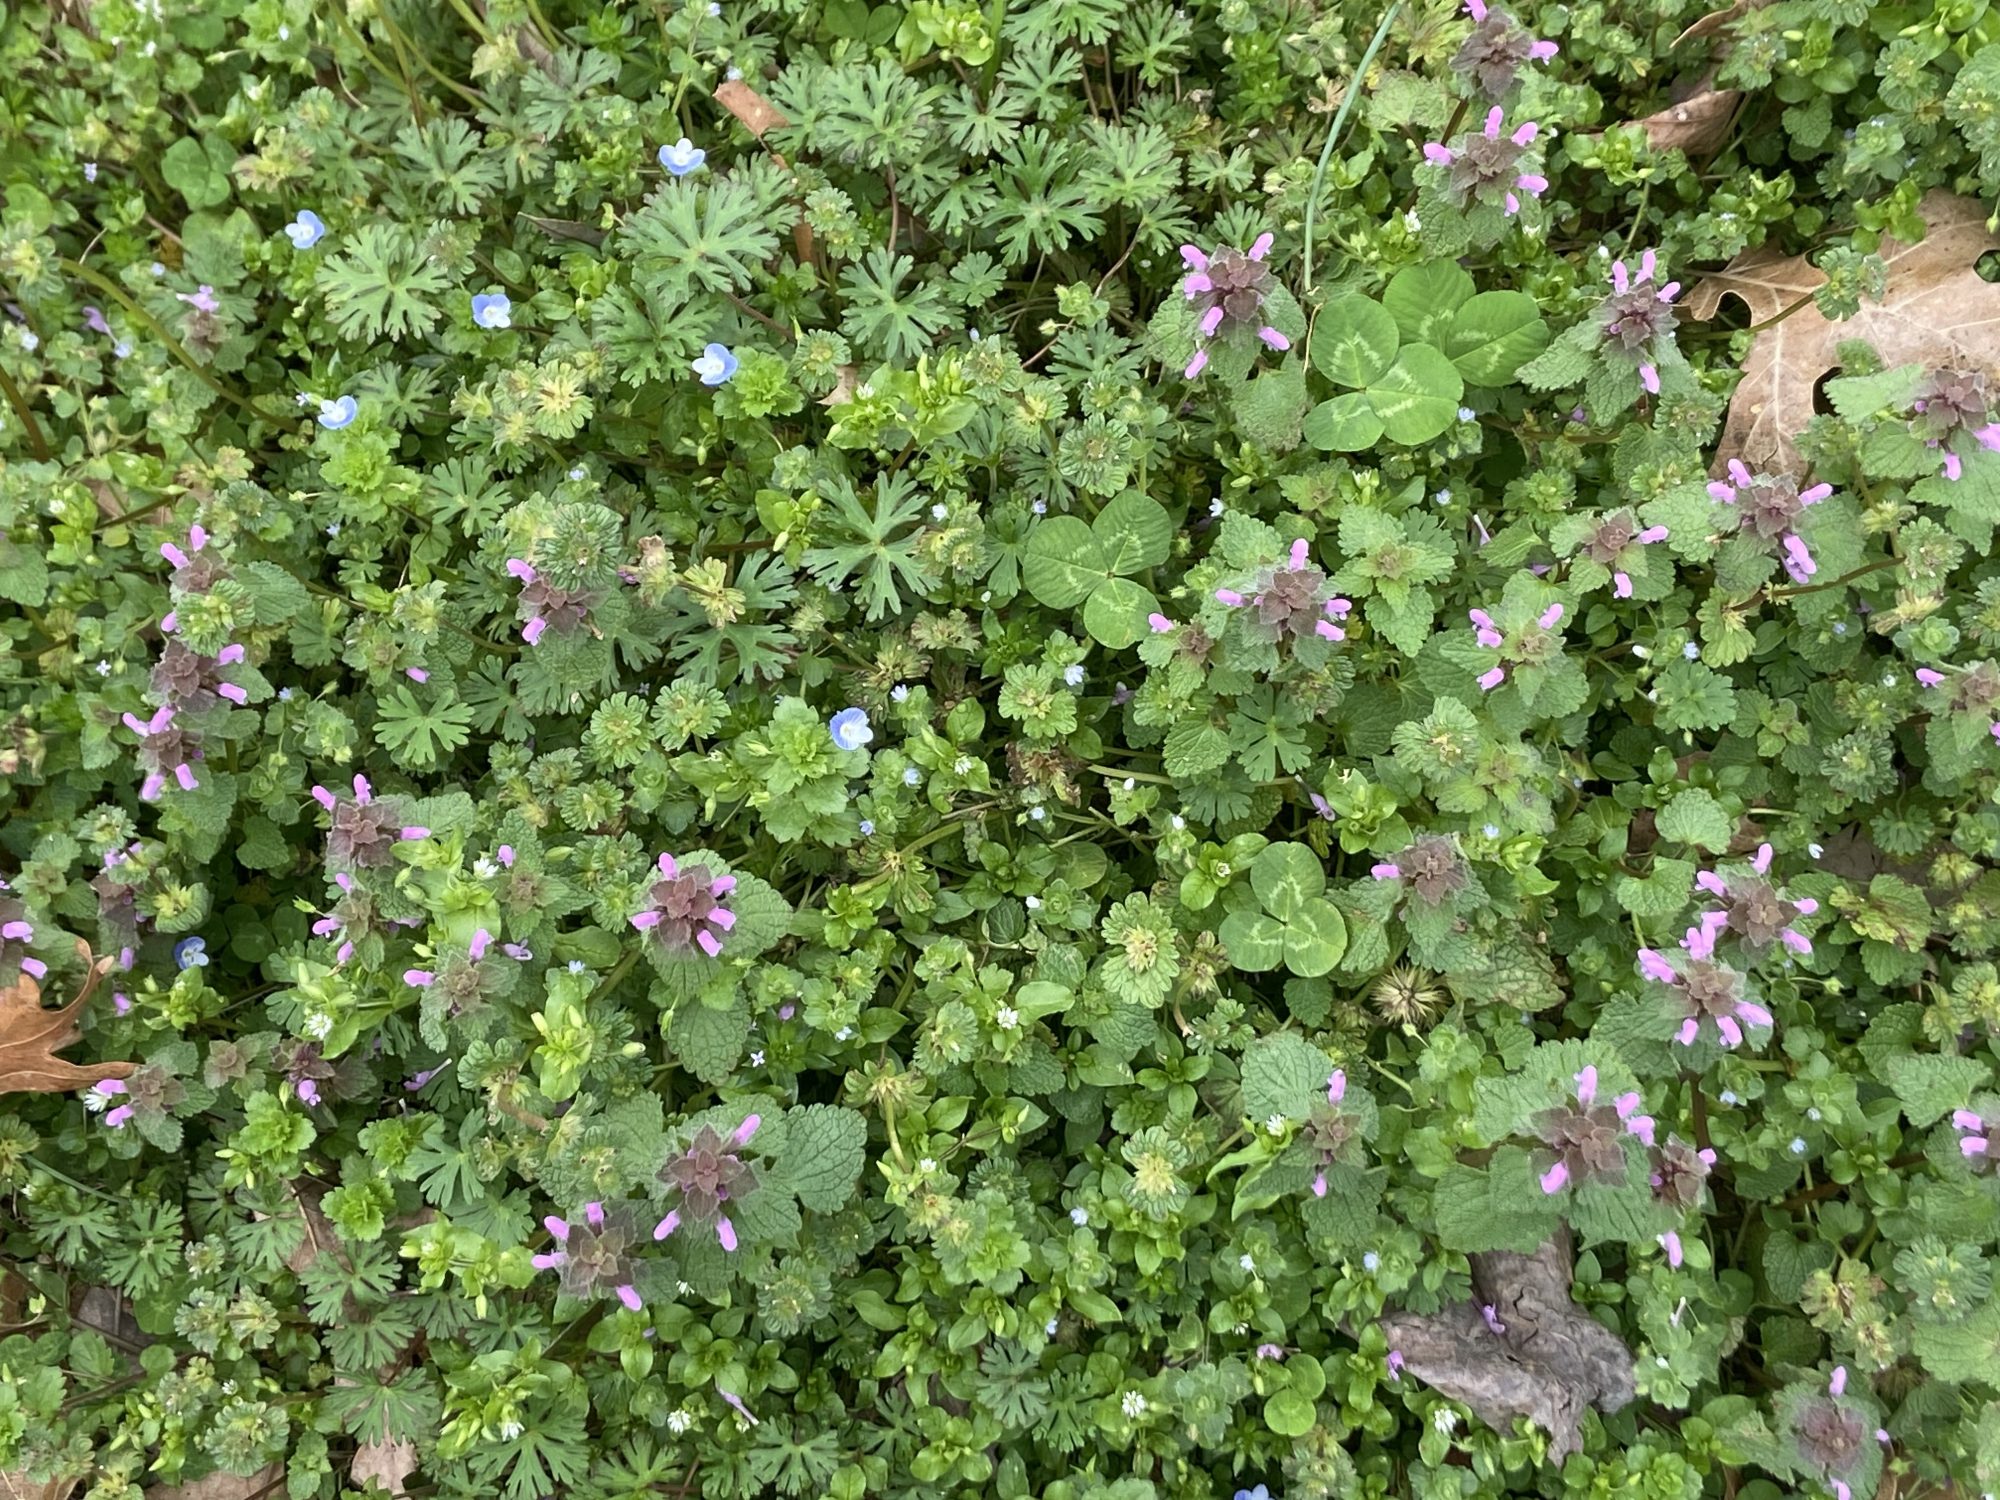 Henbit, speedwell and white clover in a springtime lawn. Photo by Ruth Ann Grissom.